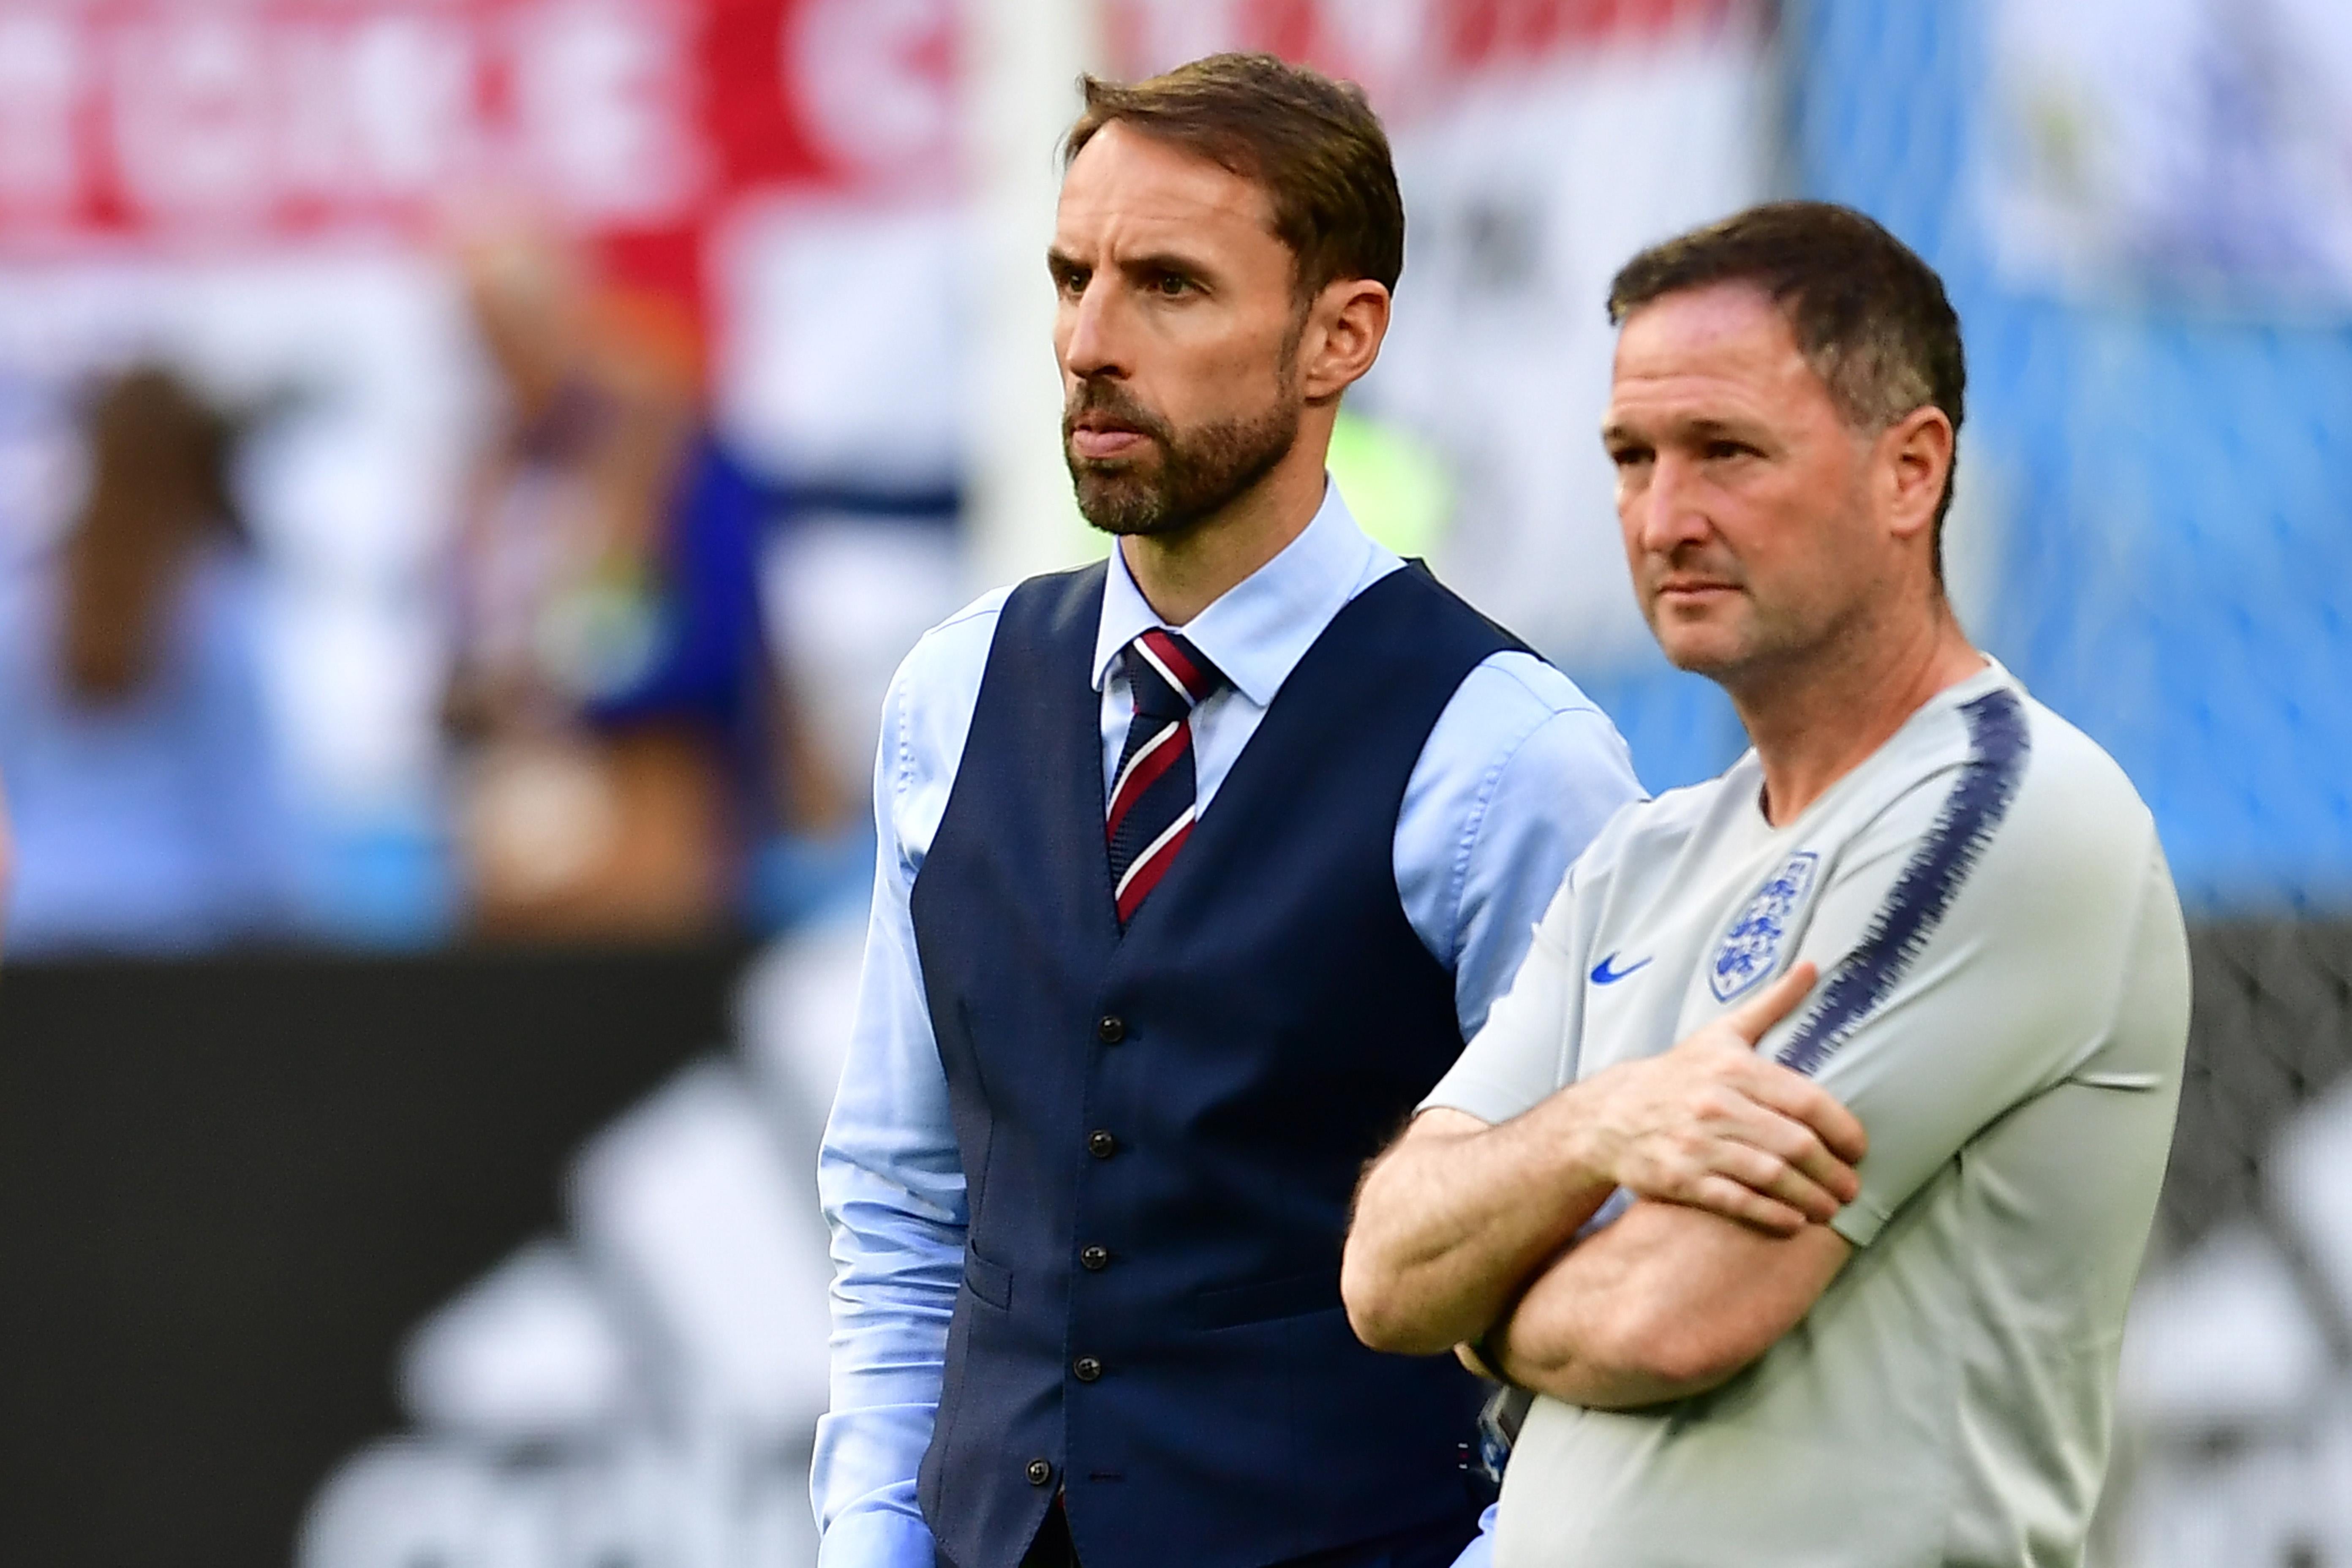 England's coach Gareth Southgate, wearing a vest, and an assistant react to Belgium's victory.